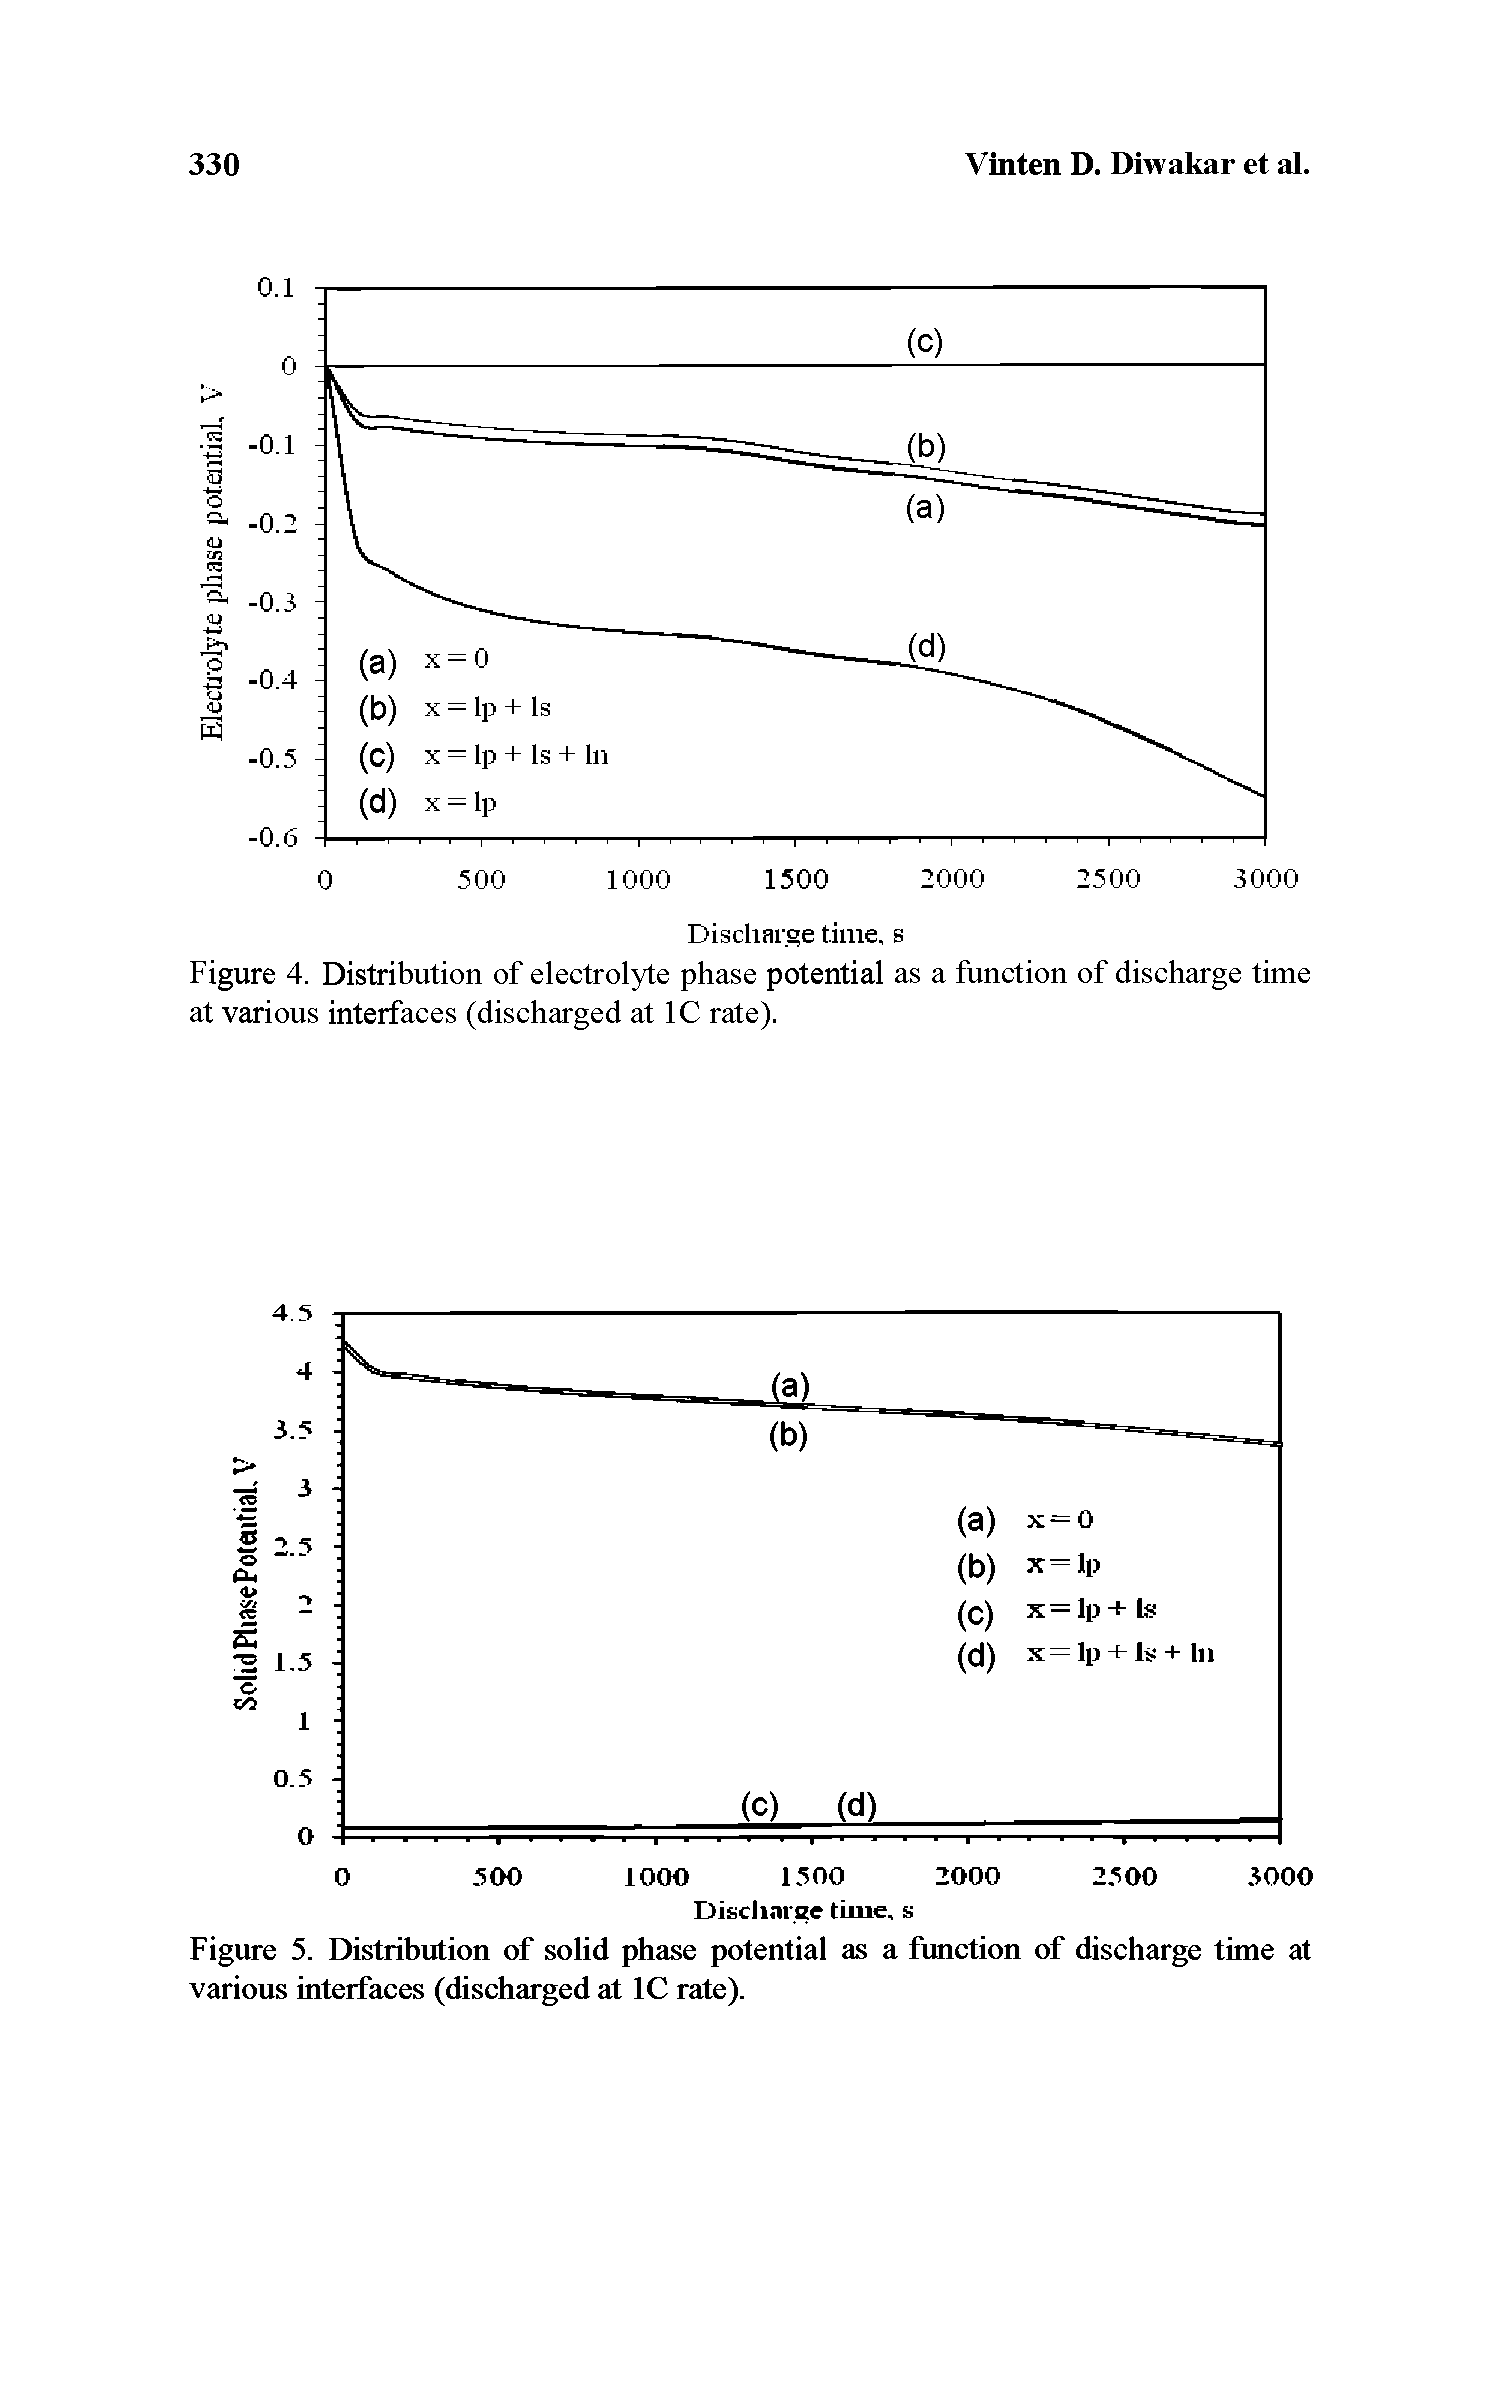 Figure 4. Distribution of electrolyte phase potential as a function of discharge time at various interfaces (discharged at 1C rate).